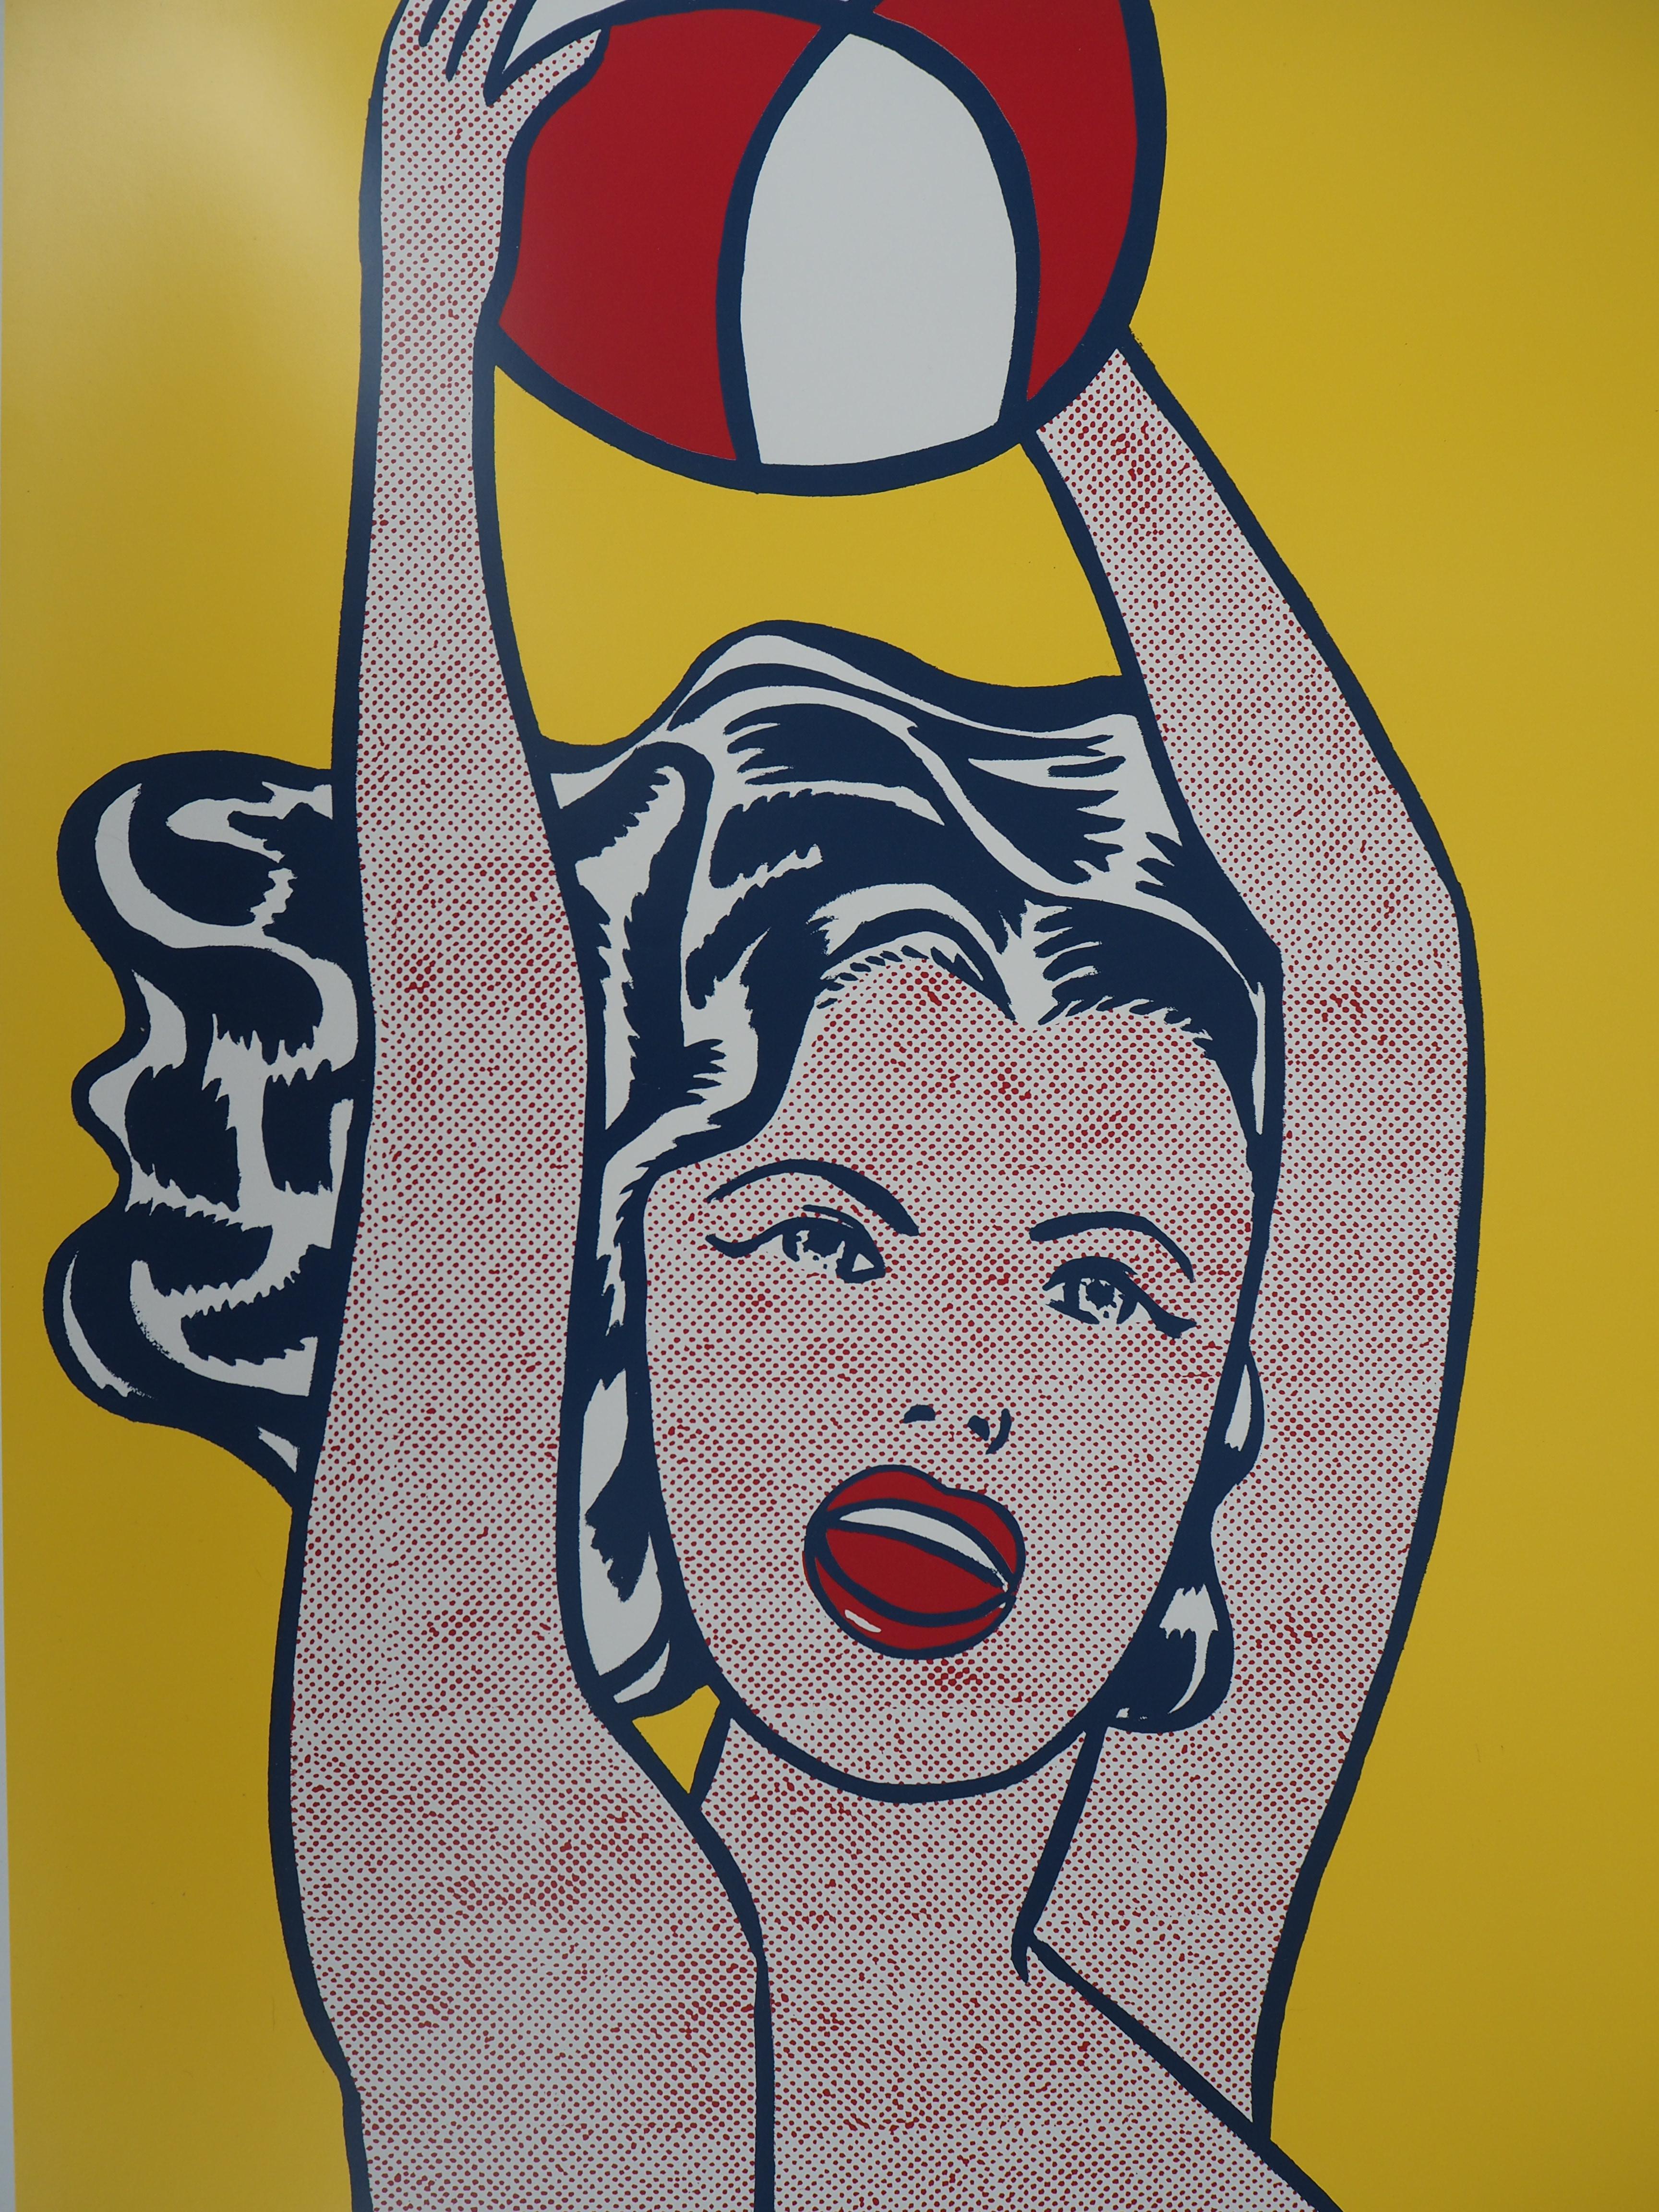 Roy Lichtenstein (after)
Woman with Red Ball 

Original vintage poster (offset print)
On paper 100 x 71 cm (c. 39 x 28 inch)
Created for the Lichtenstein exhibition in Palais des Beaux Arts, Brussels 1995

Excellent condition, minor defects at the